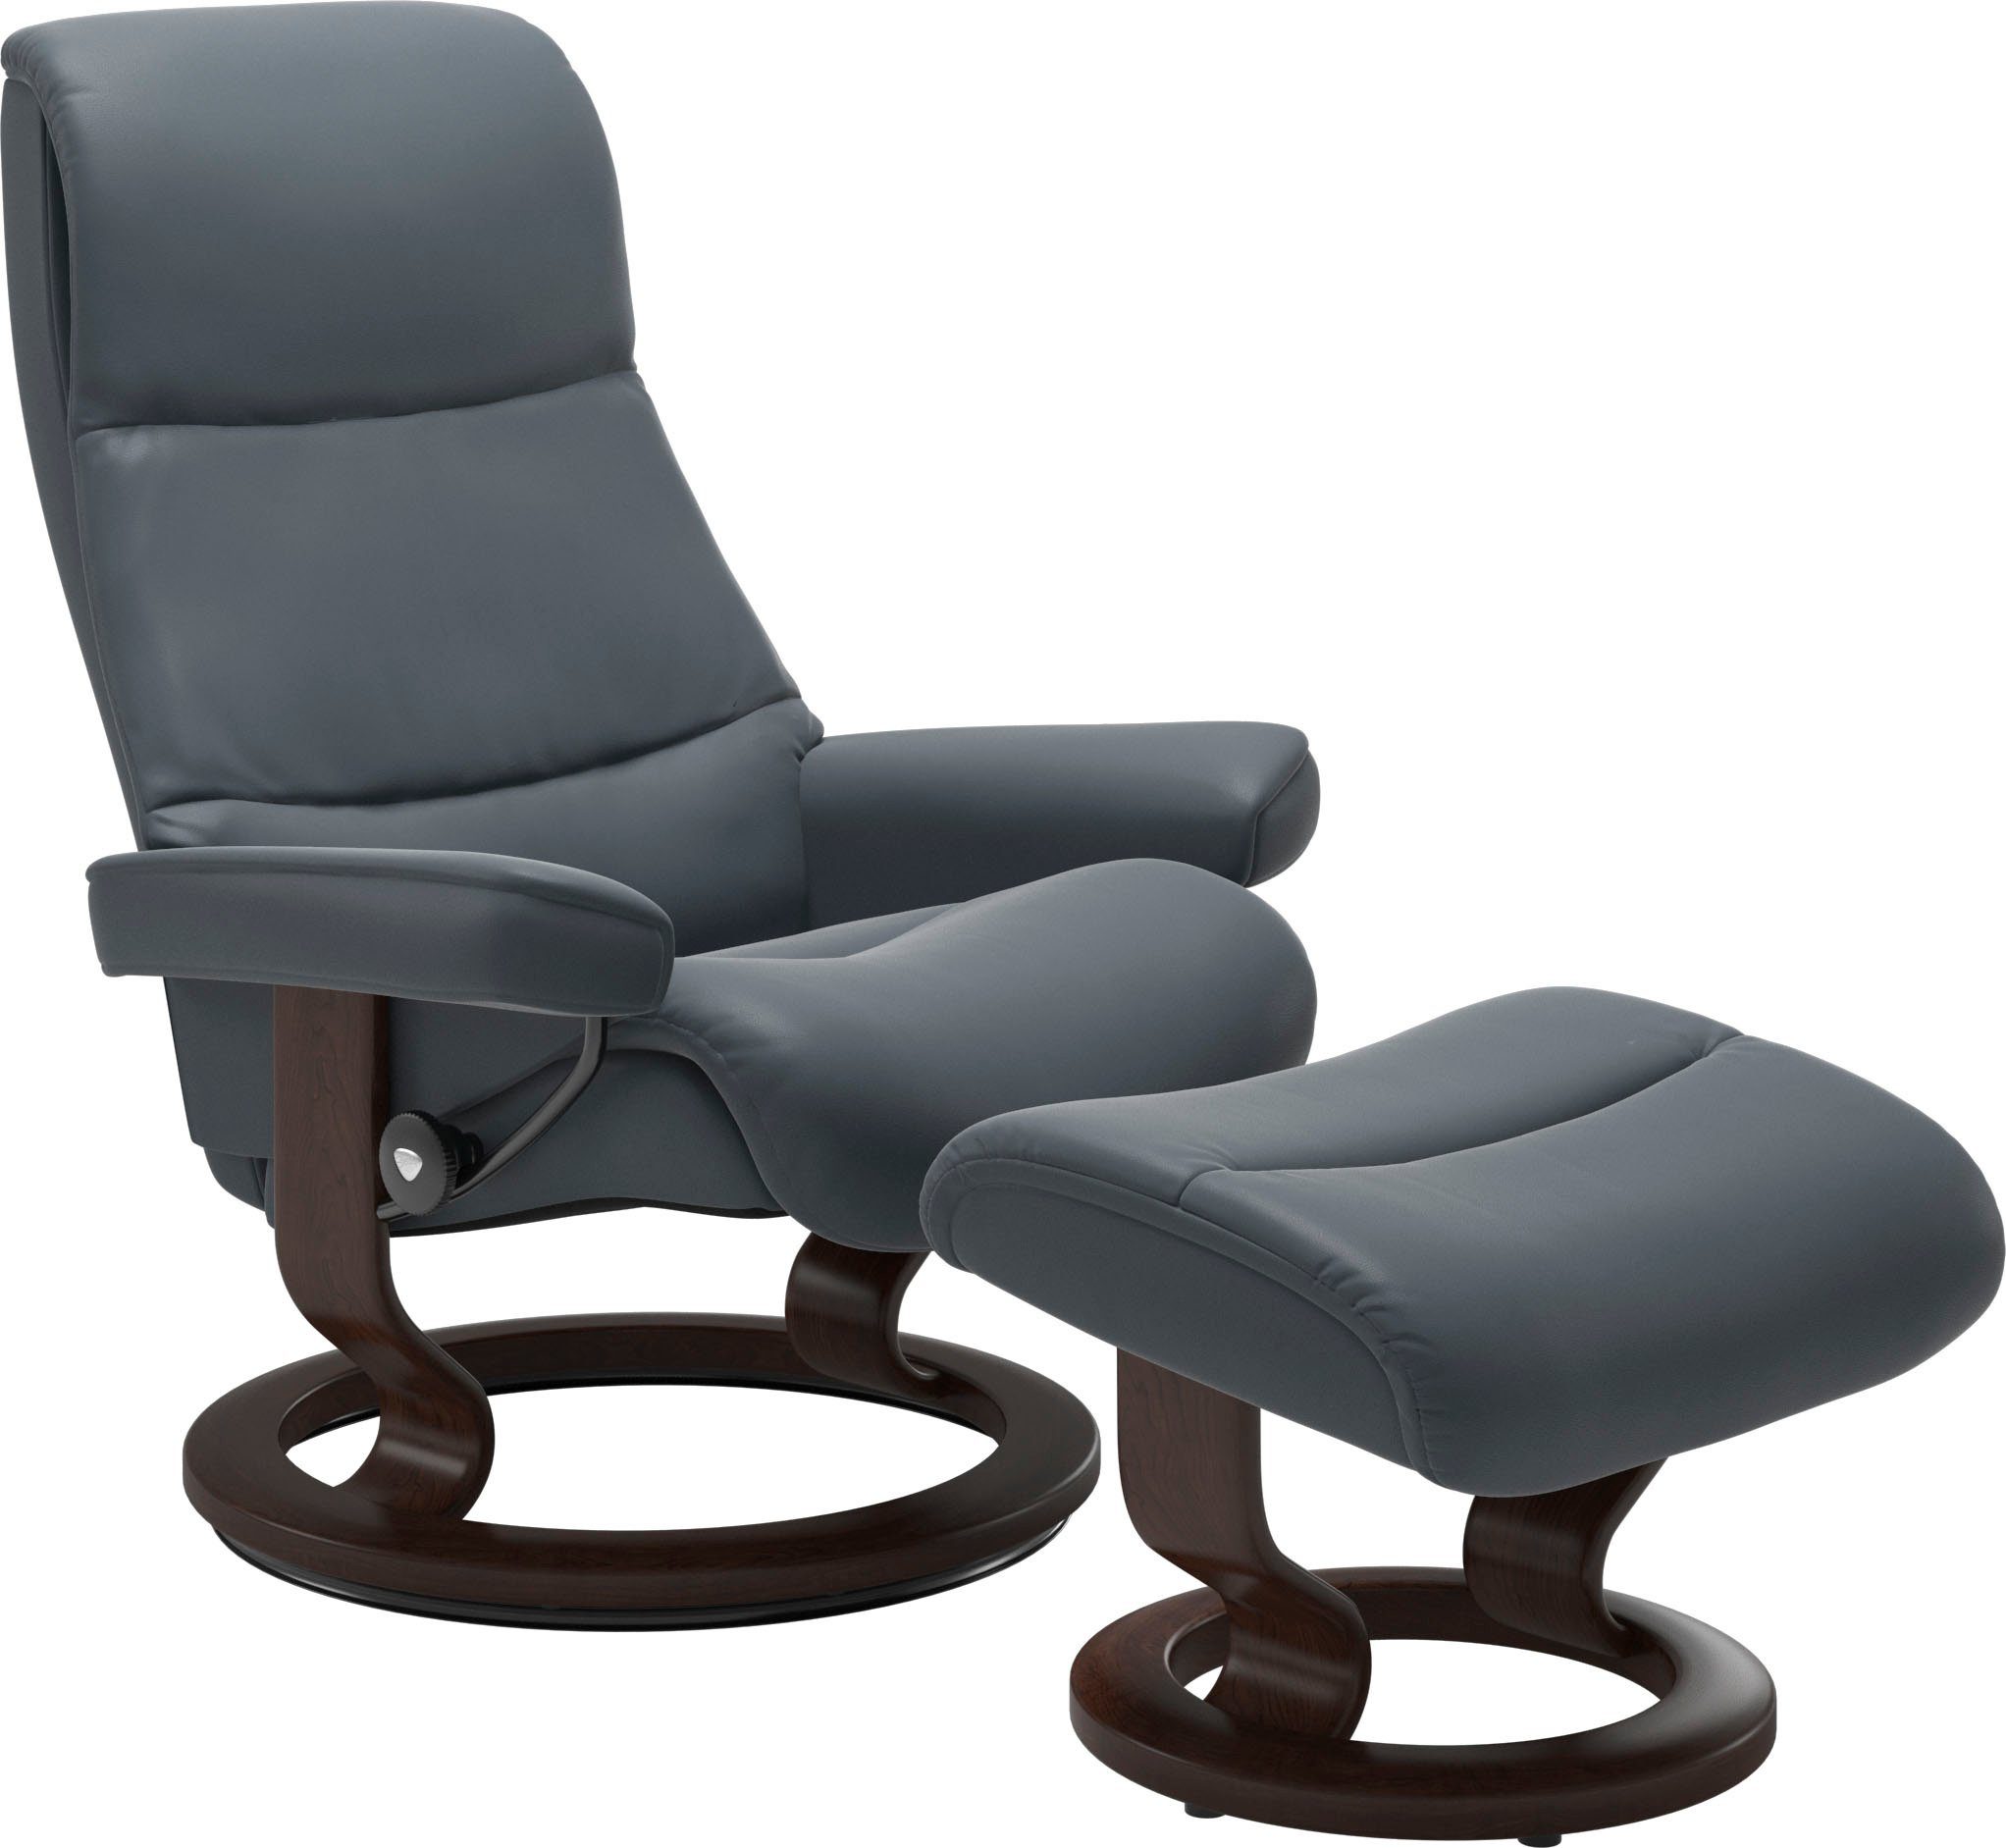 Stressless® Relaxsessel View, mit Classic Base, Größe S,Gestell Braun | Funktionssessel